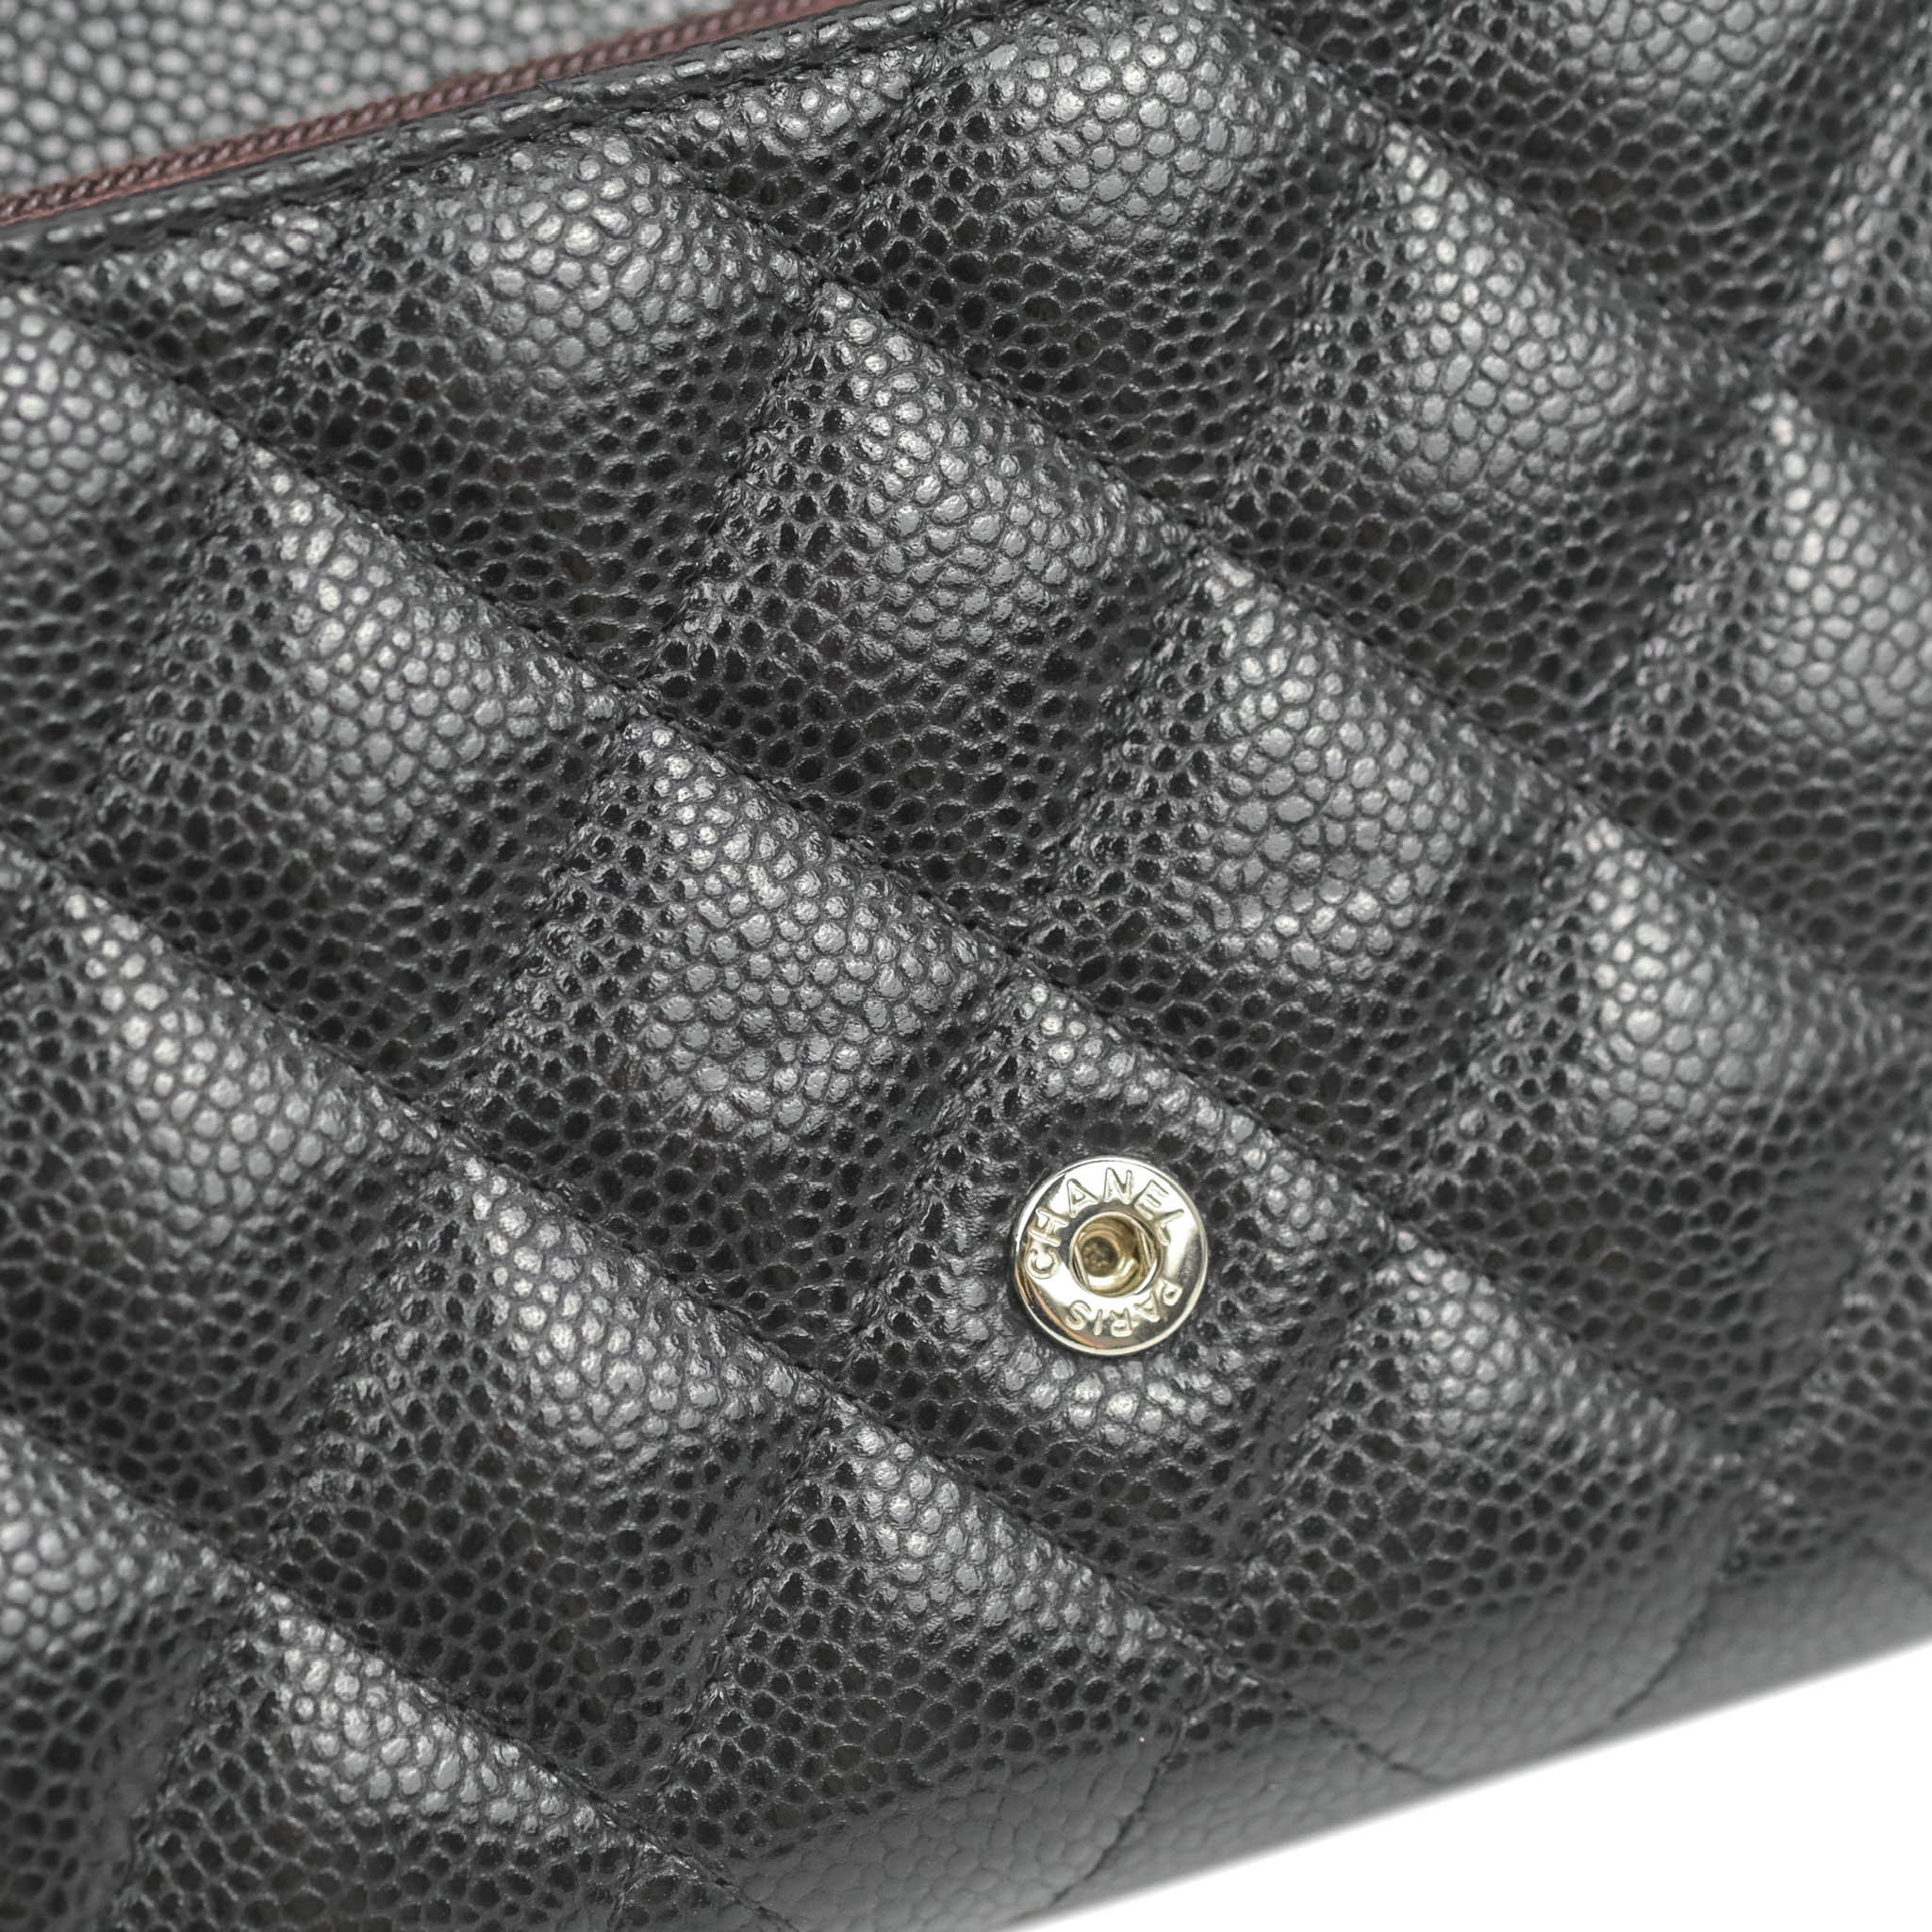 small chanel 19 flap bag